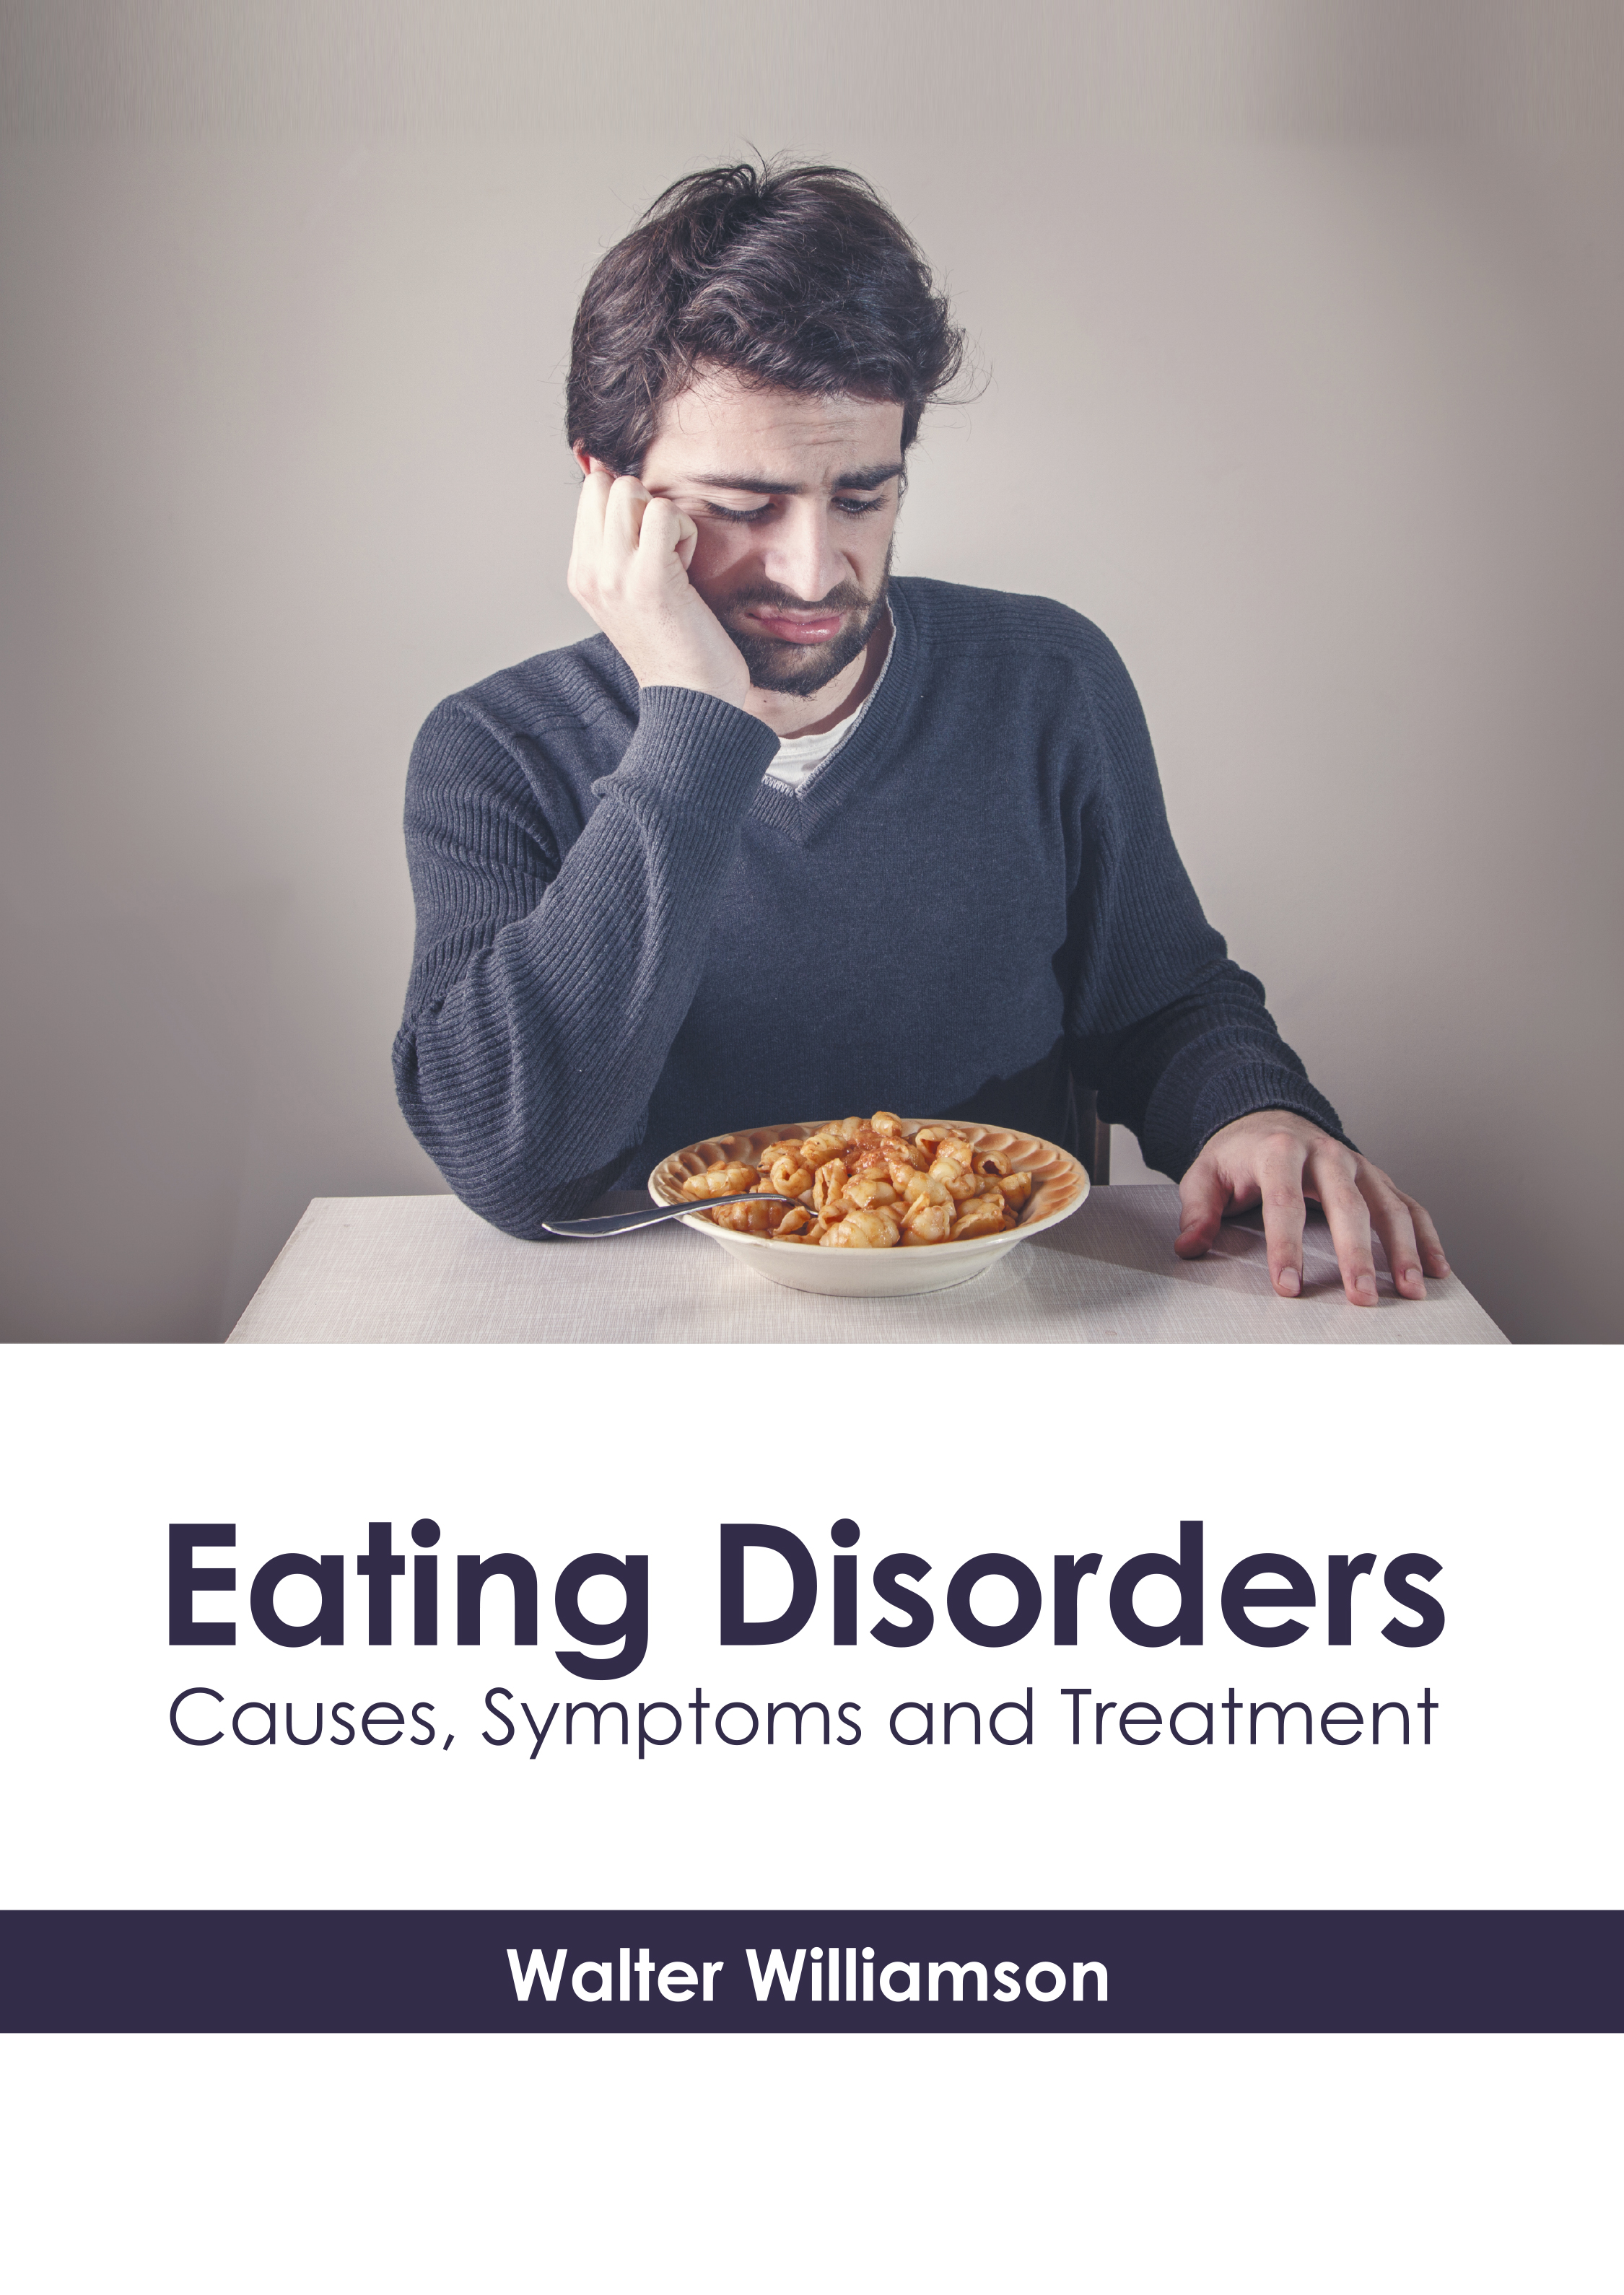 EATING DISORDERS: CAUSES, SYMPTOMS AND TREATMENT- ISBN: 9781639270927